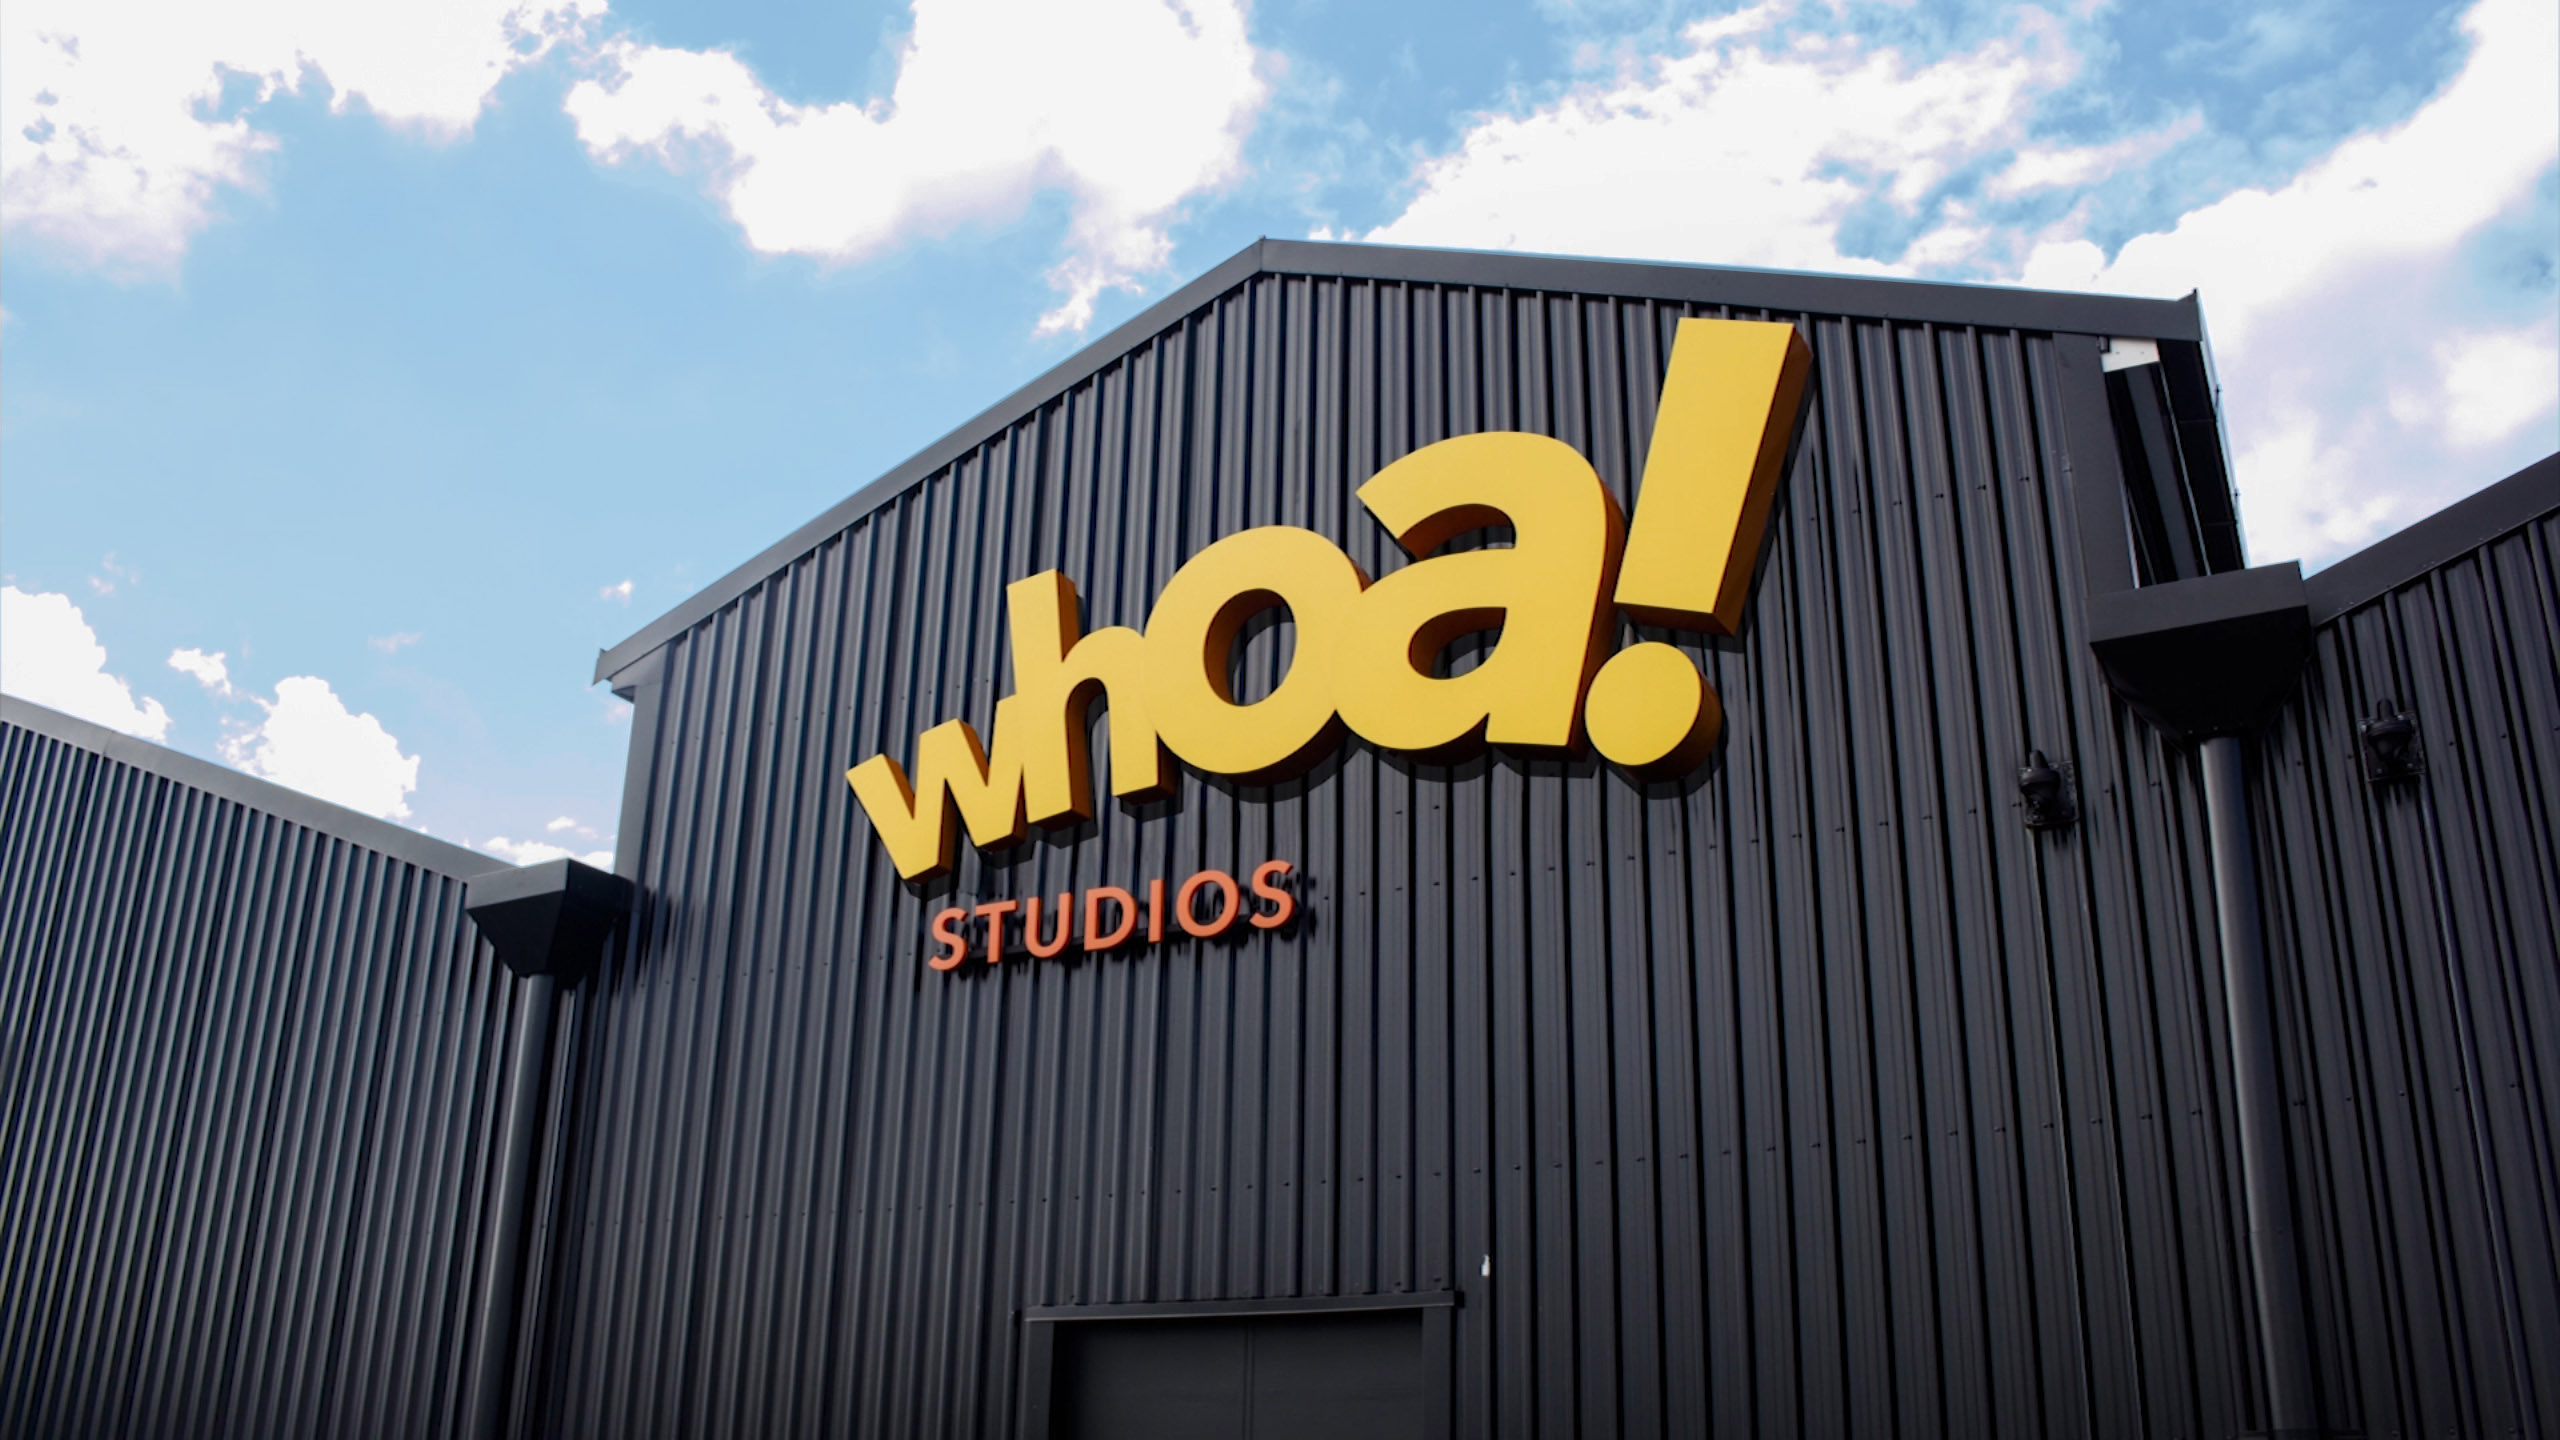 HARMAN Professional Solutions Provide Unforgettable Live Experiences At Whoa! Studios